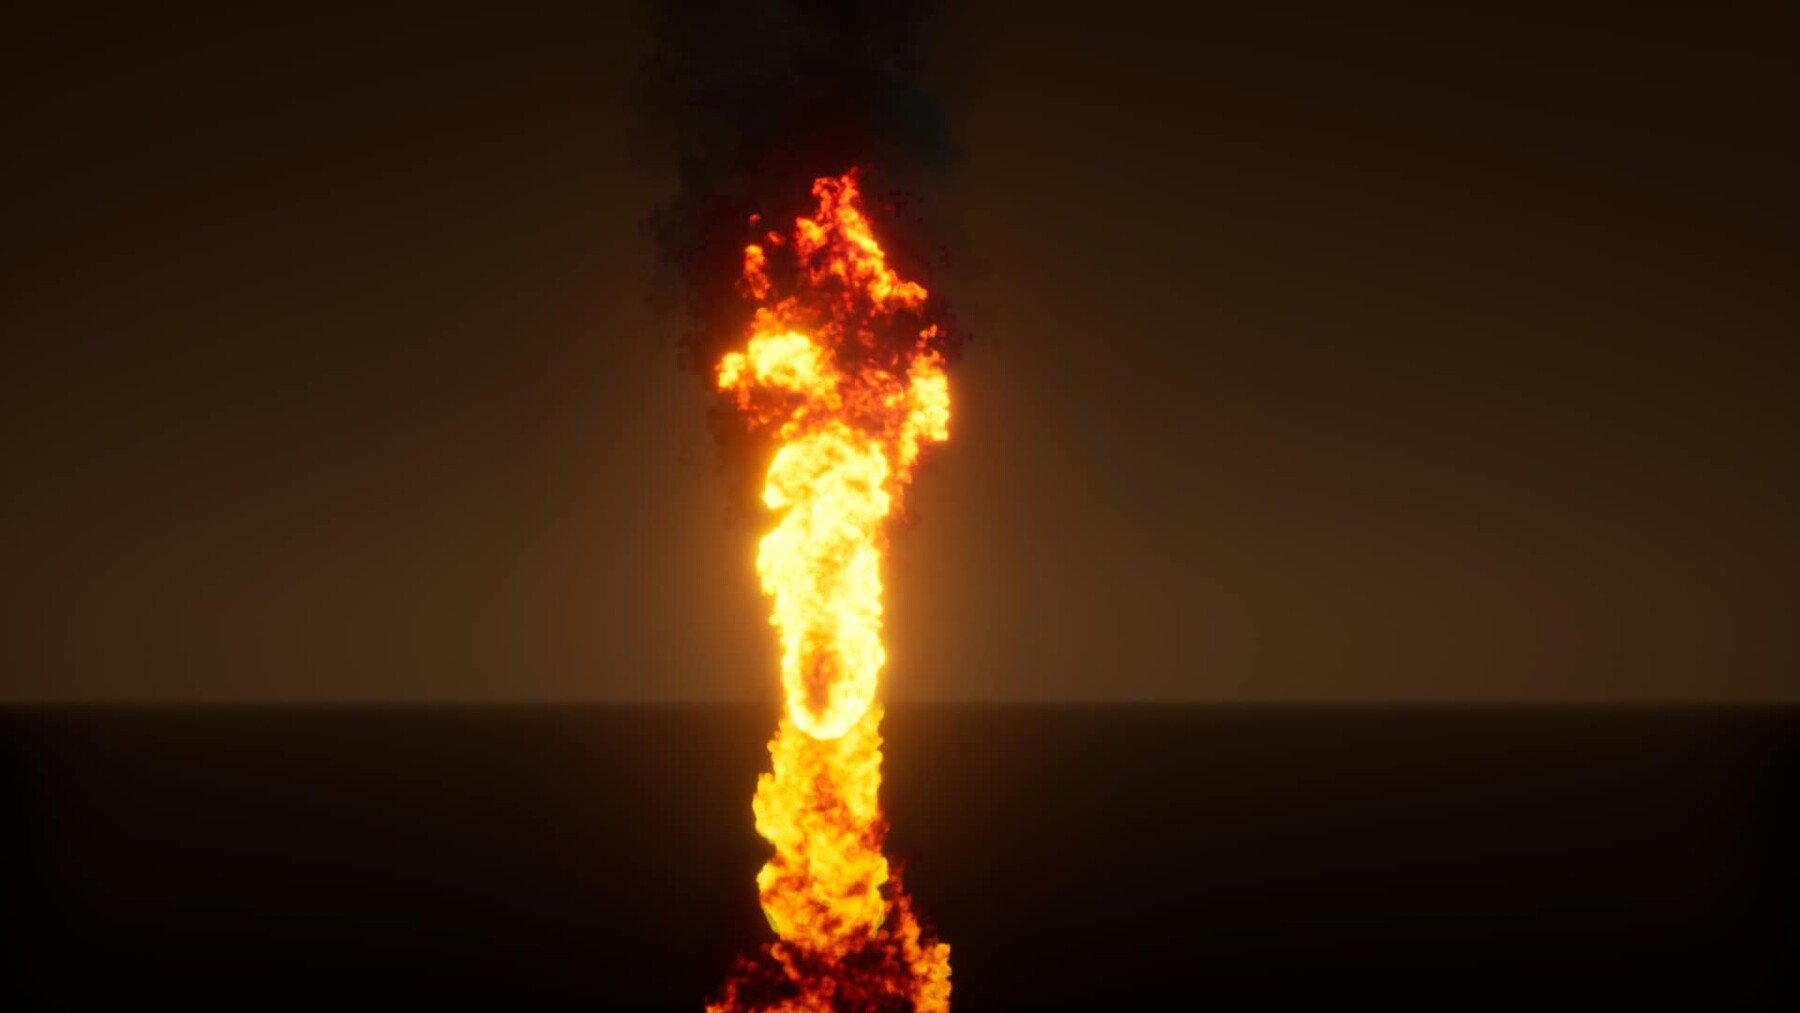 flamethrower after effects download